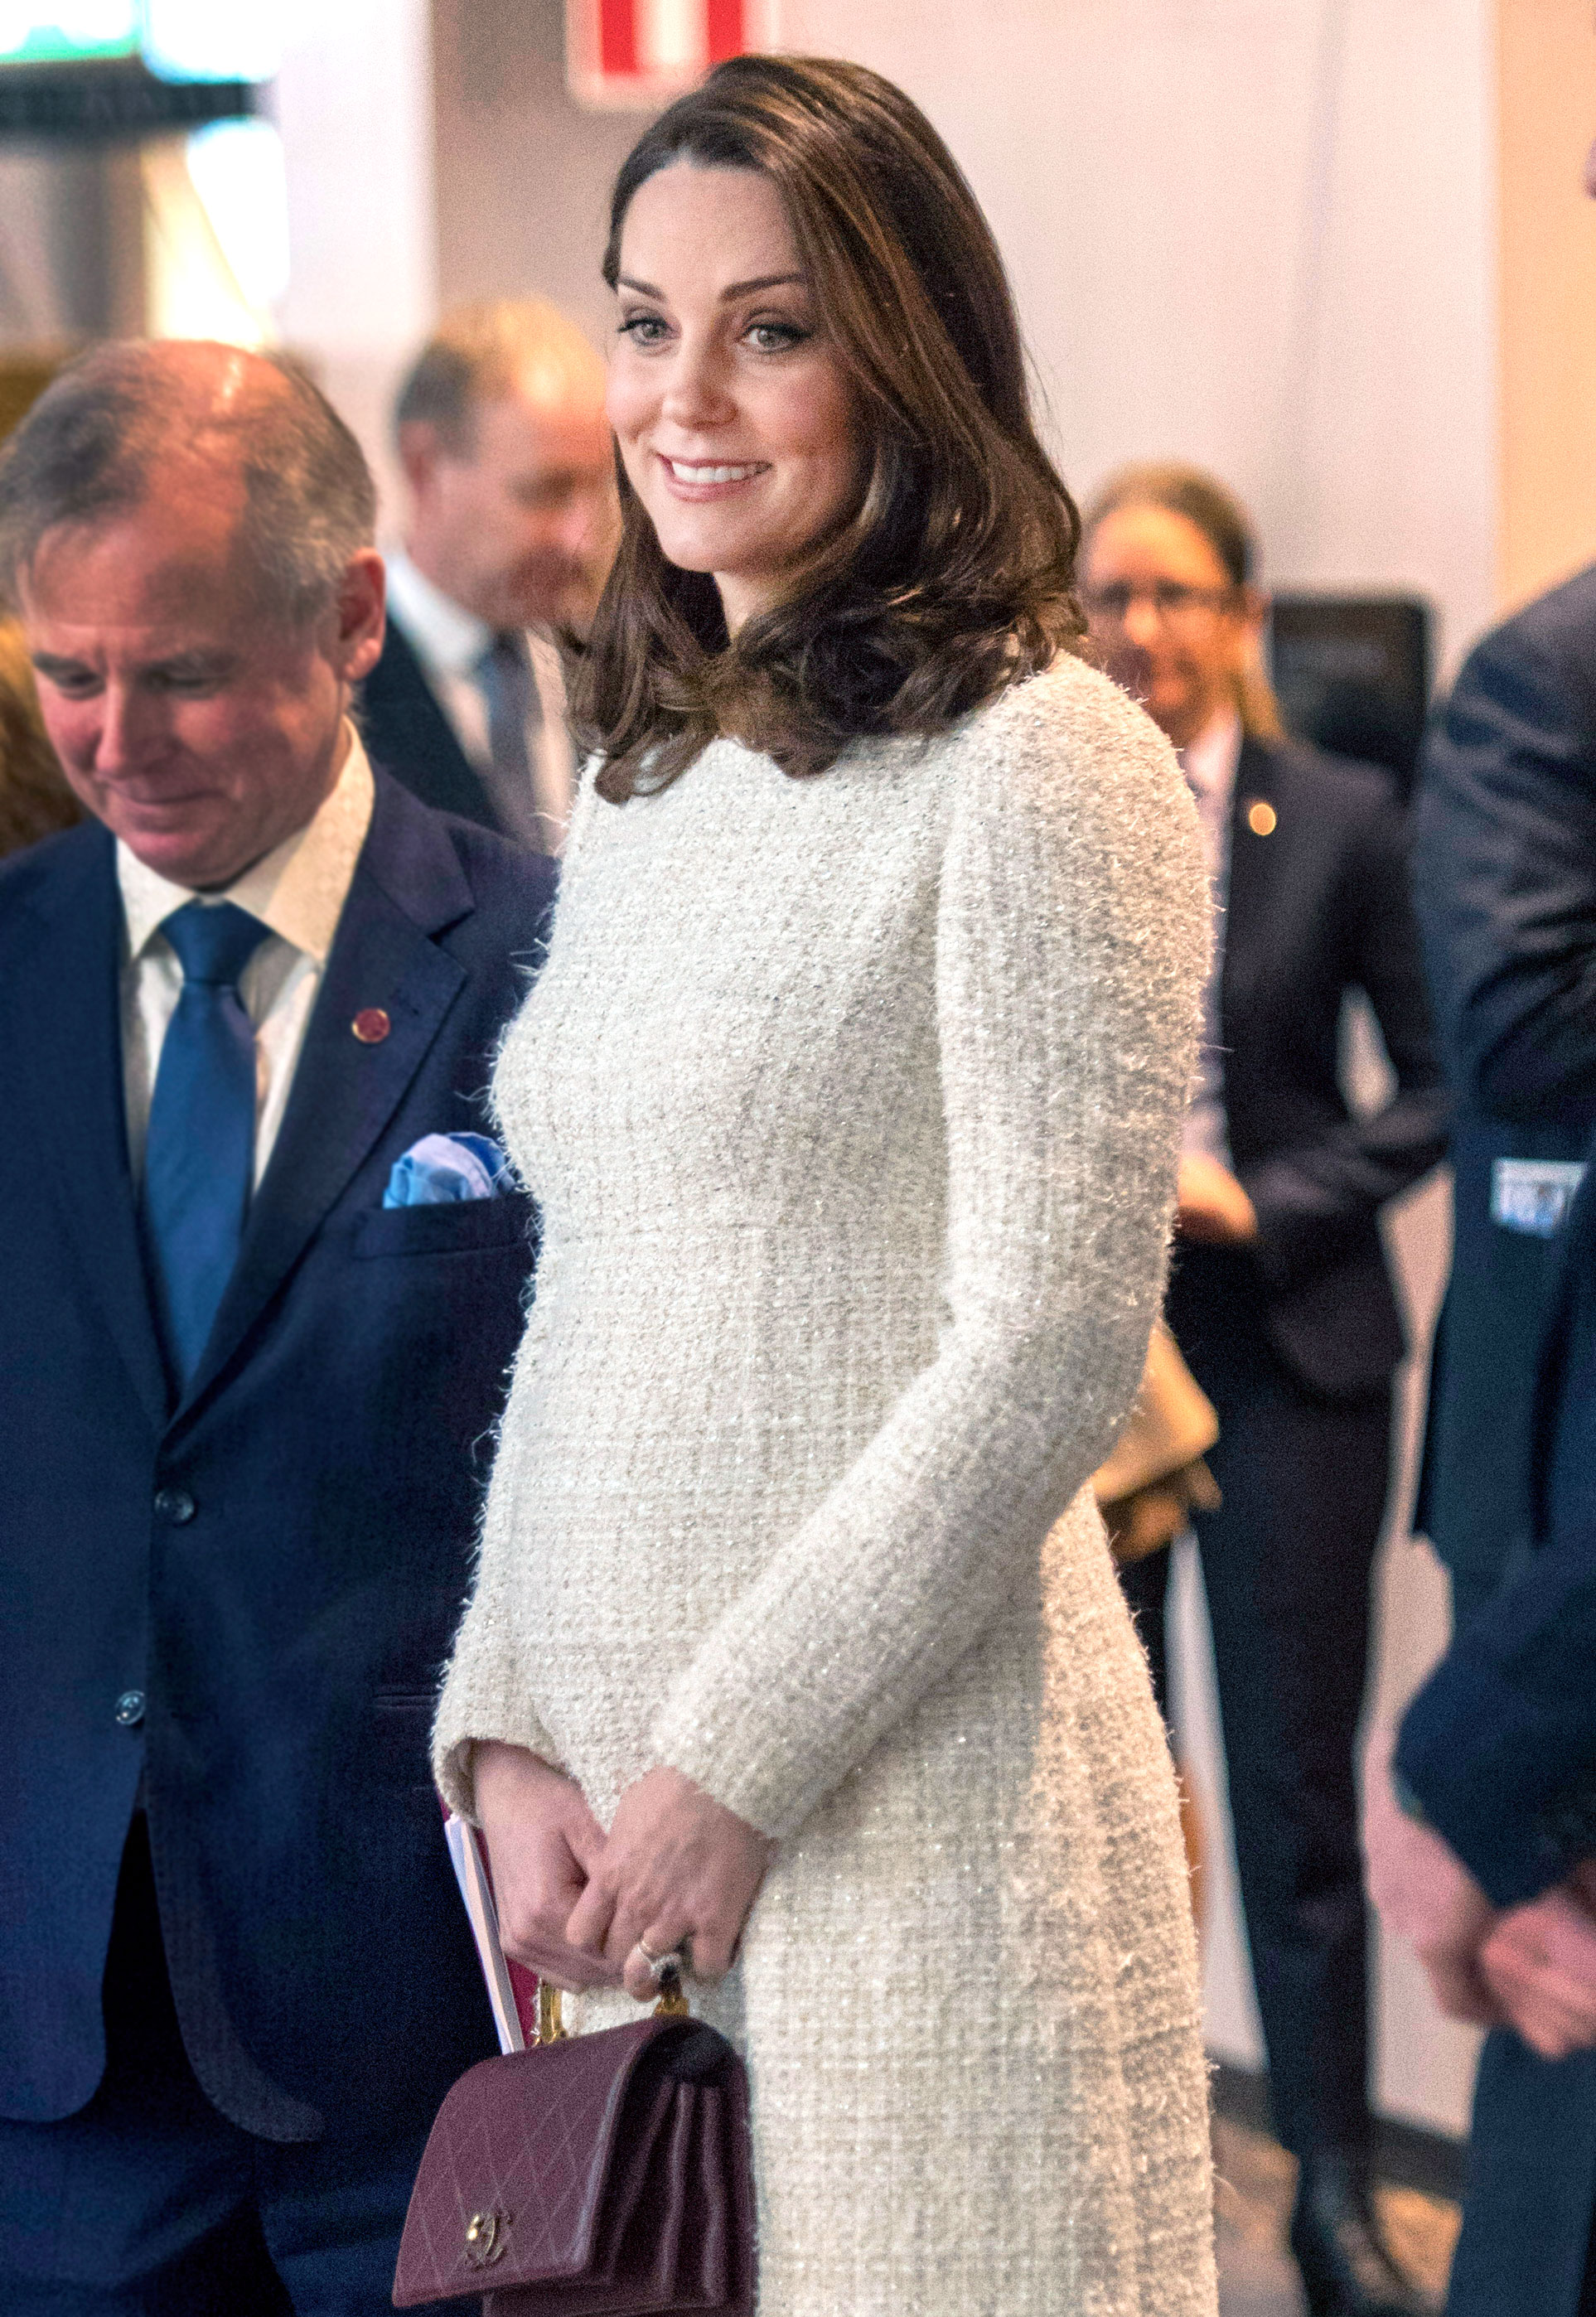 Kate Middleton Looks Positively Bridal in Her Latest White Lace